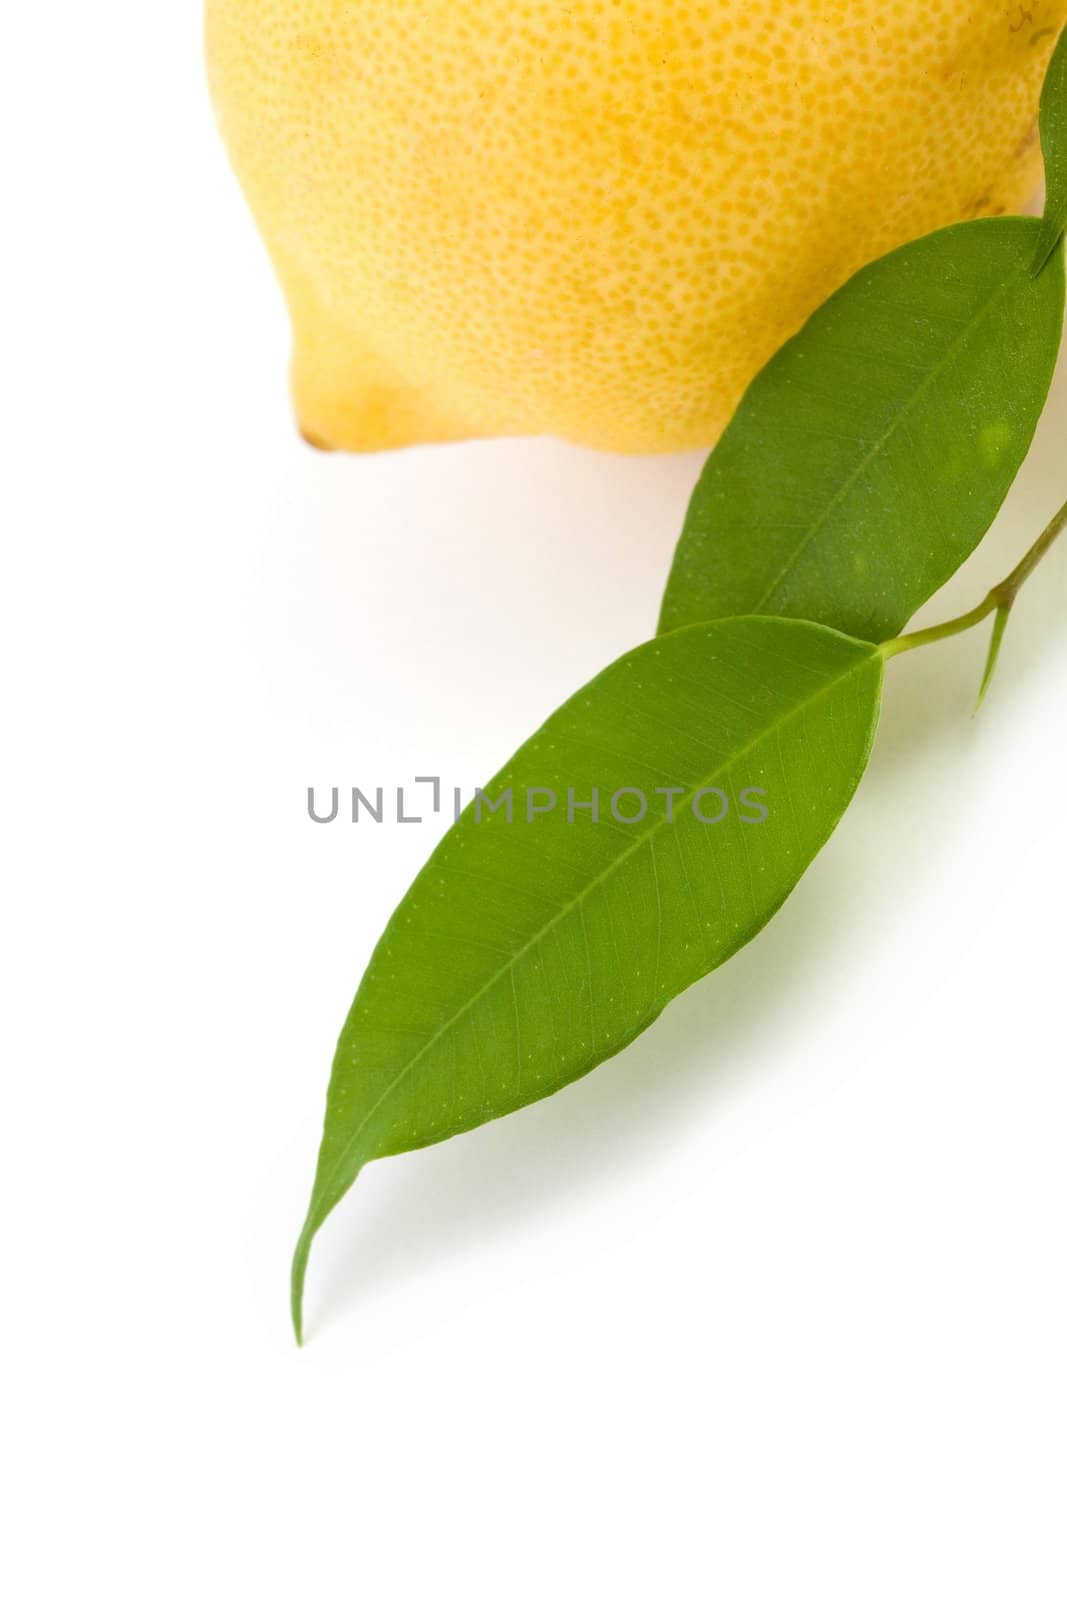 An image of a yellow lemon and green leaves